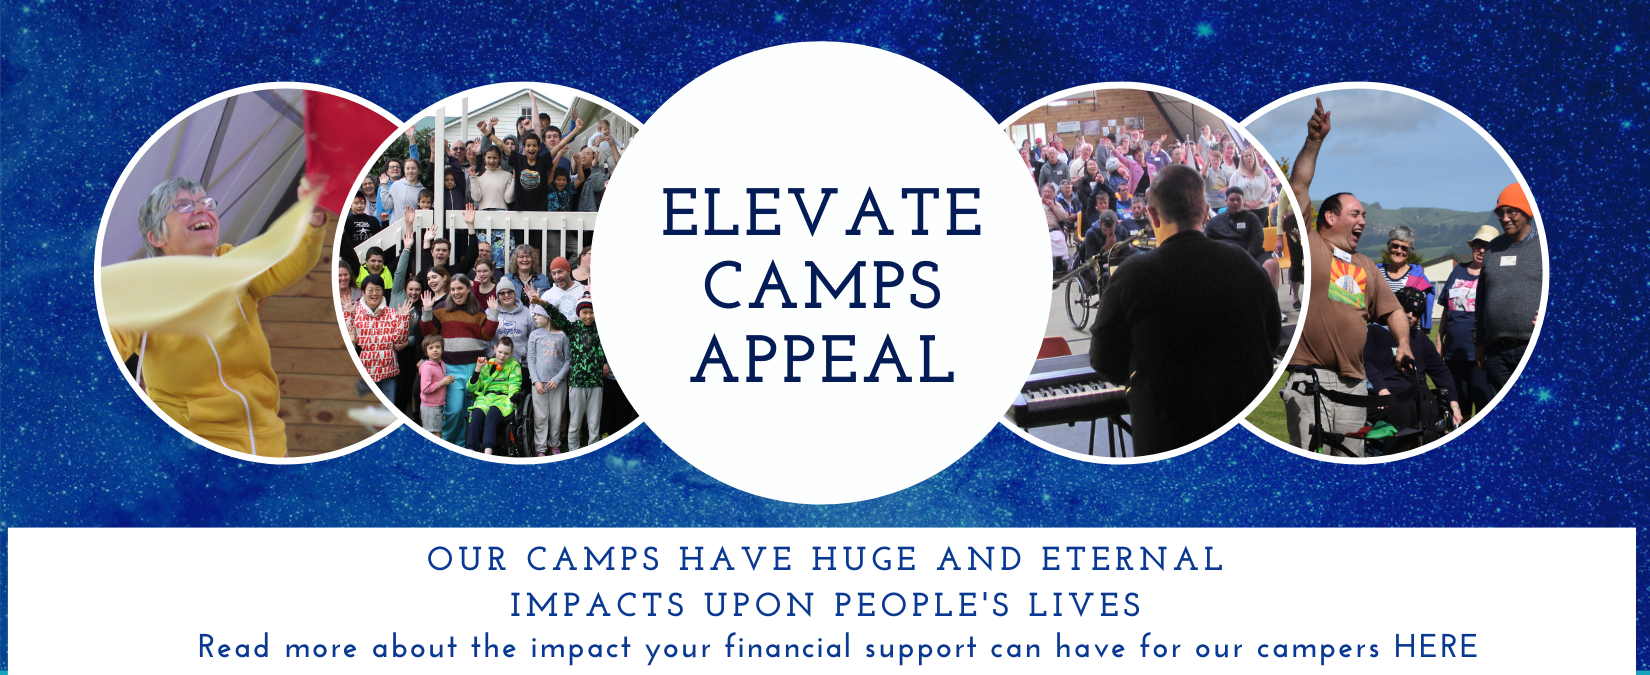 Elevate Camps Appeal our camps have huge and eternal impacts upon people's lives. Read more about the impact your financial support can have for our campers HERE